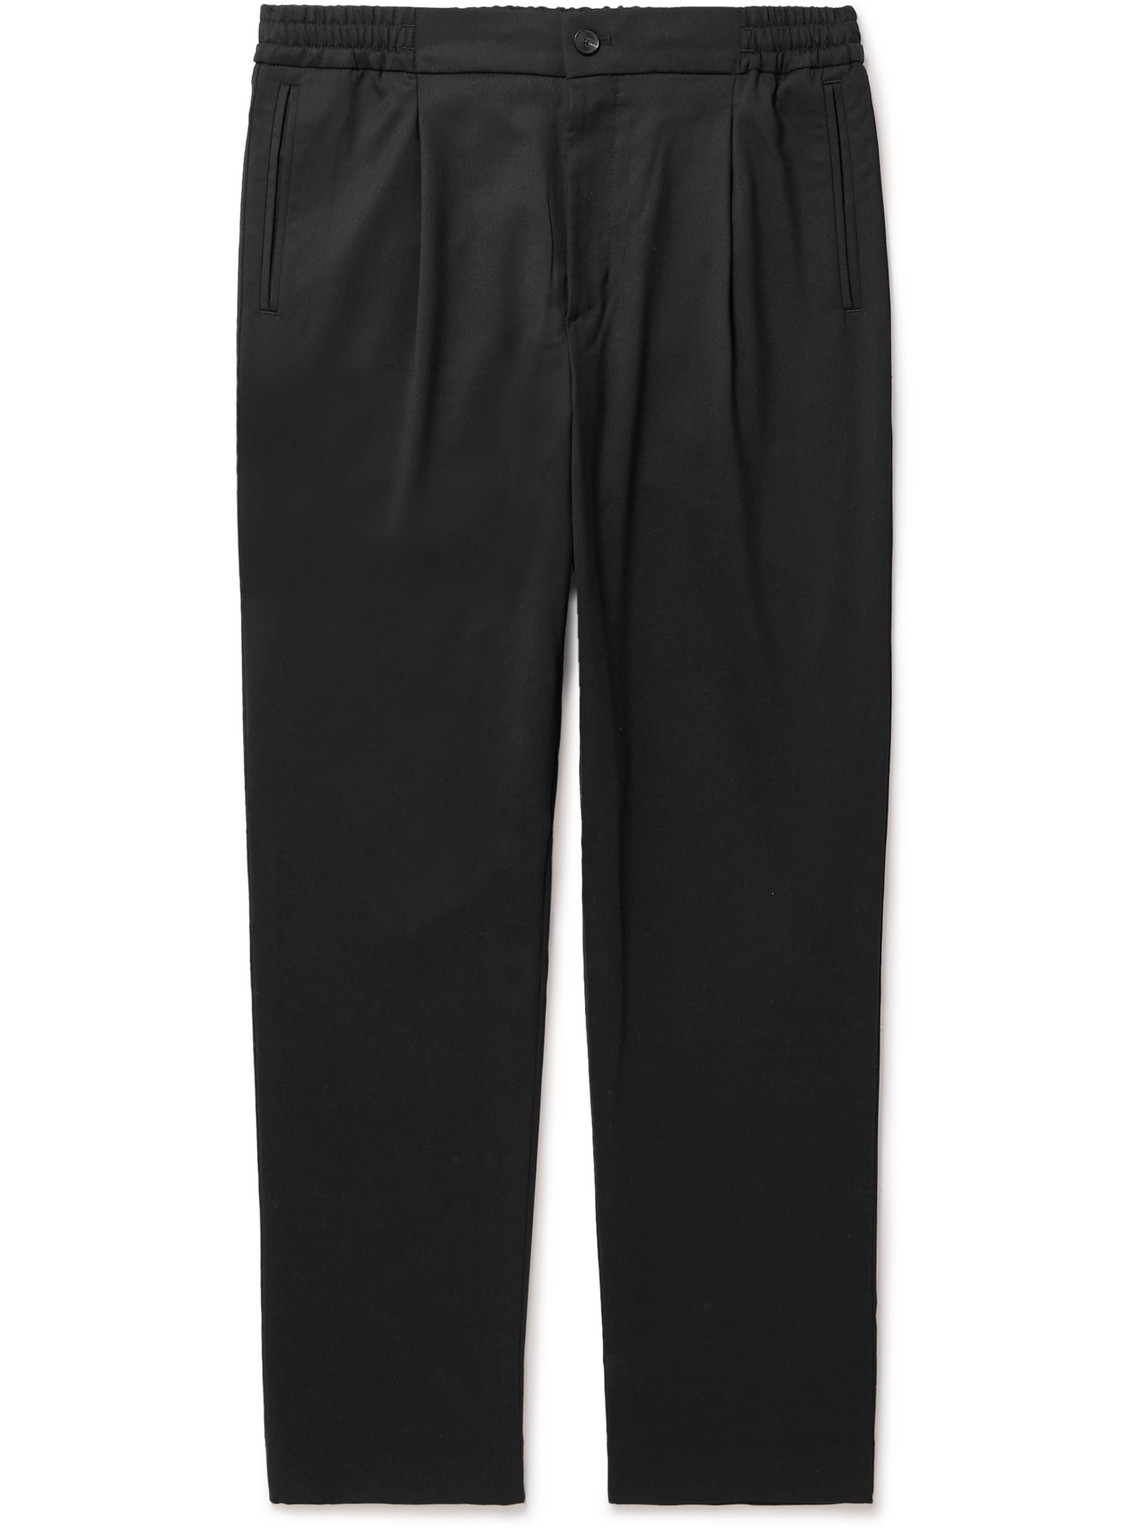 Mr P Tapered Twill Trousers In Black